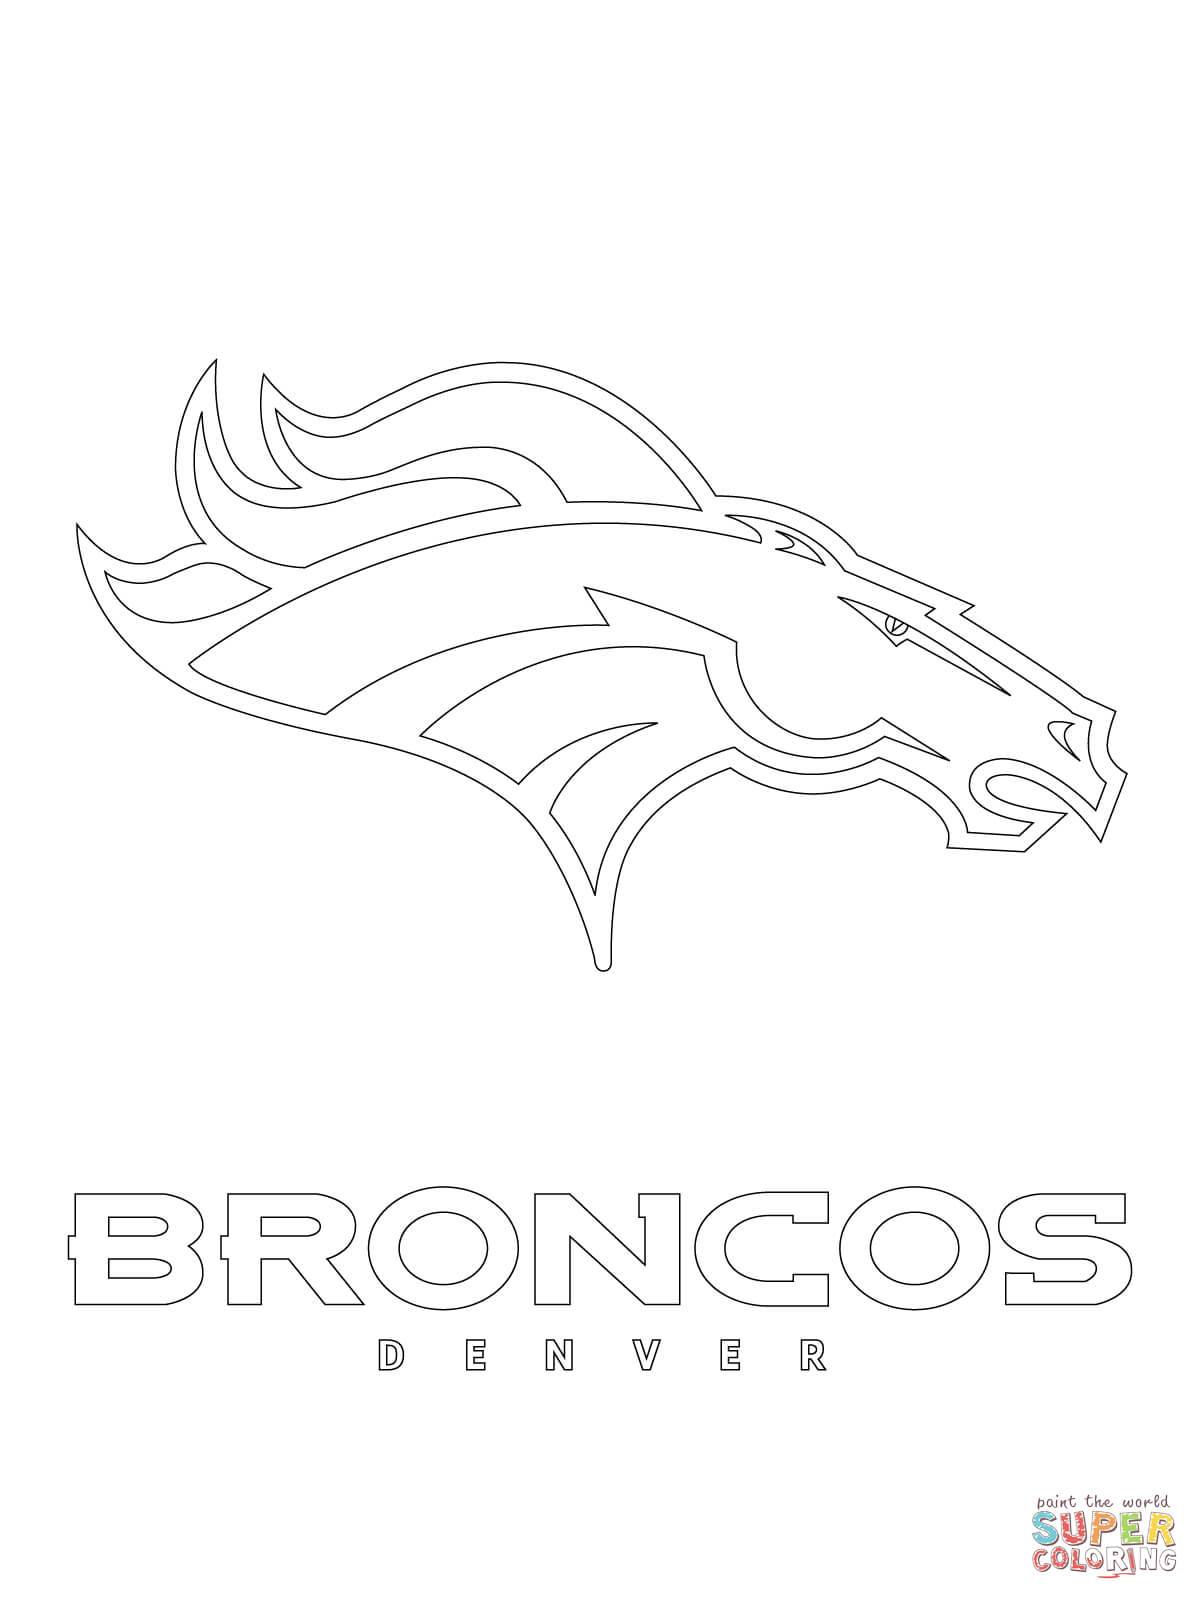 Denver Broncos Logo coloring page | Free Printable Coloring Pages